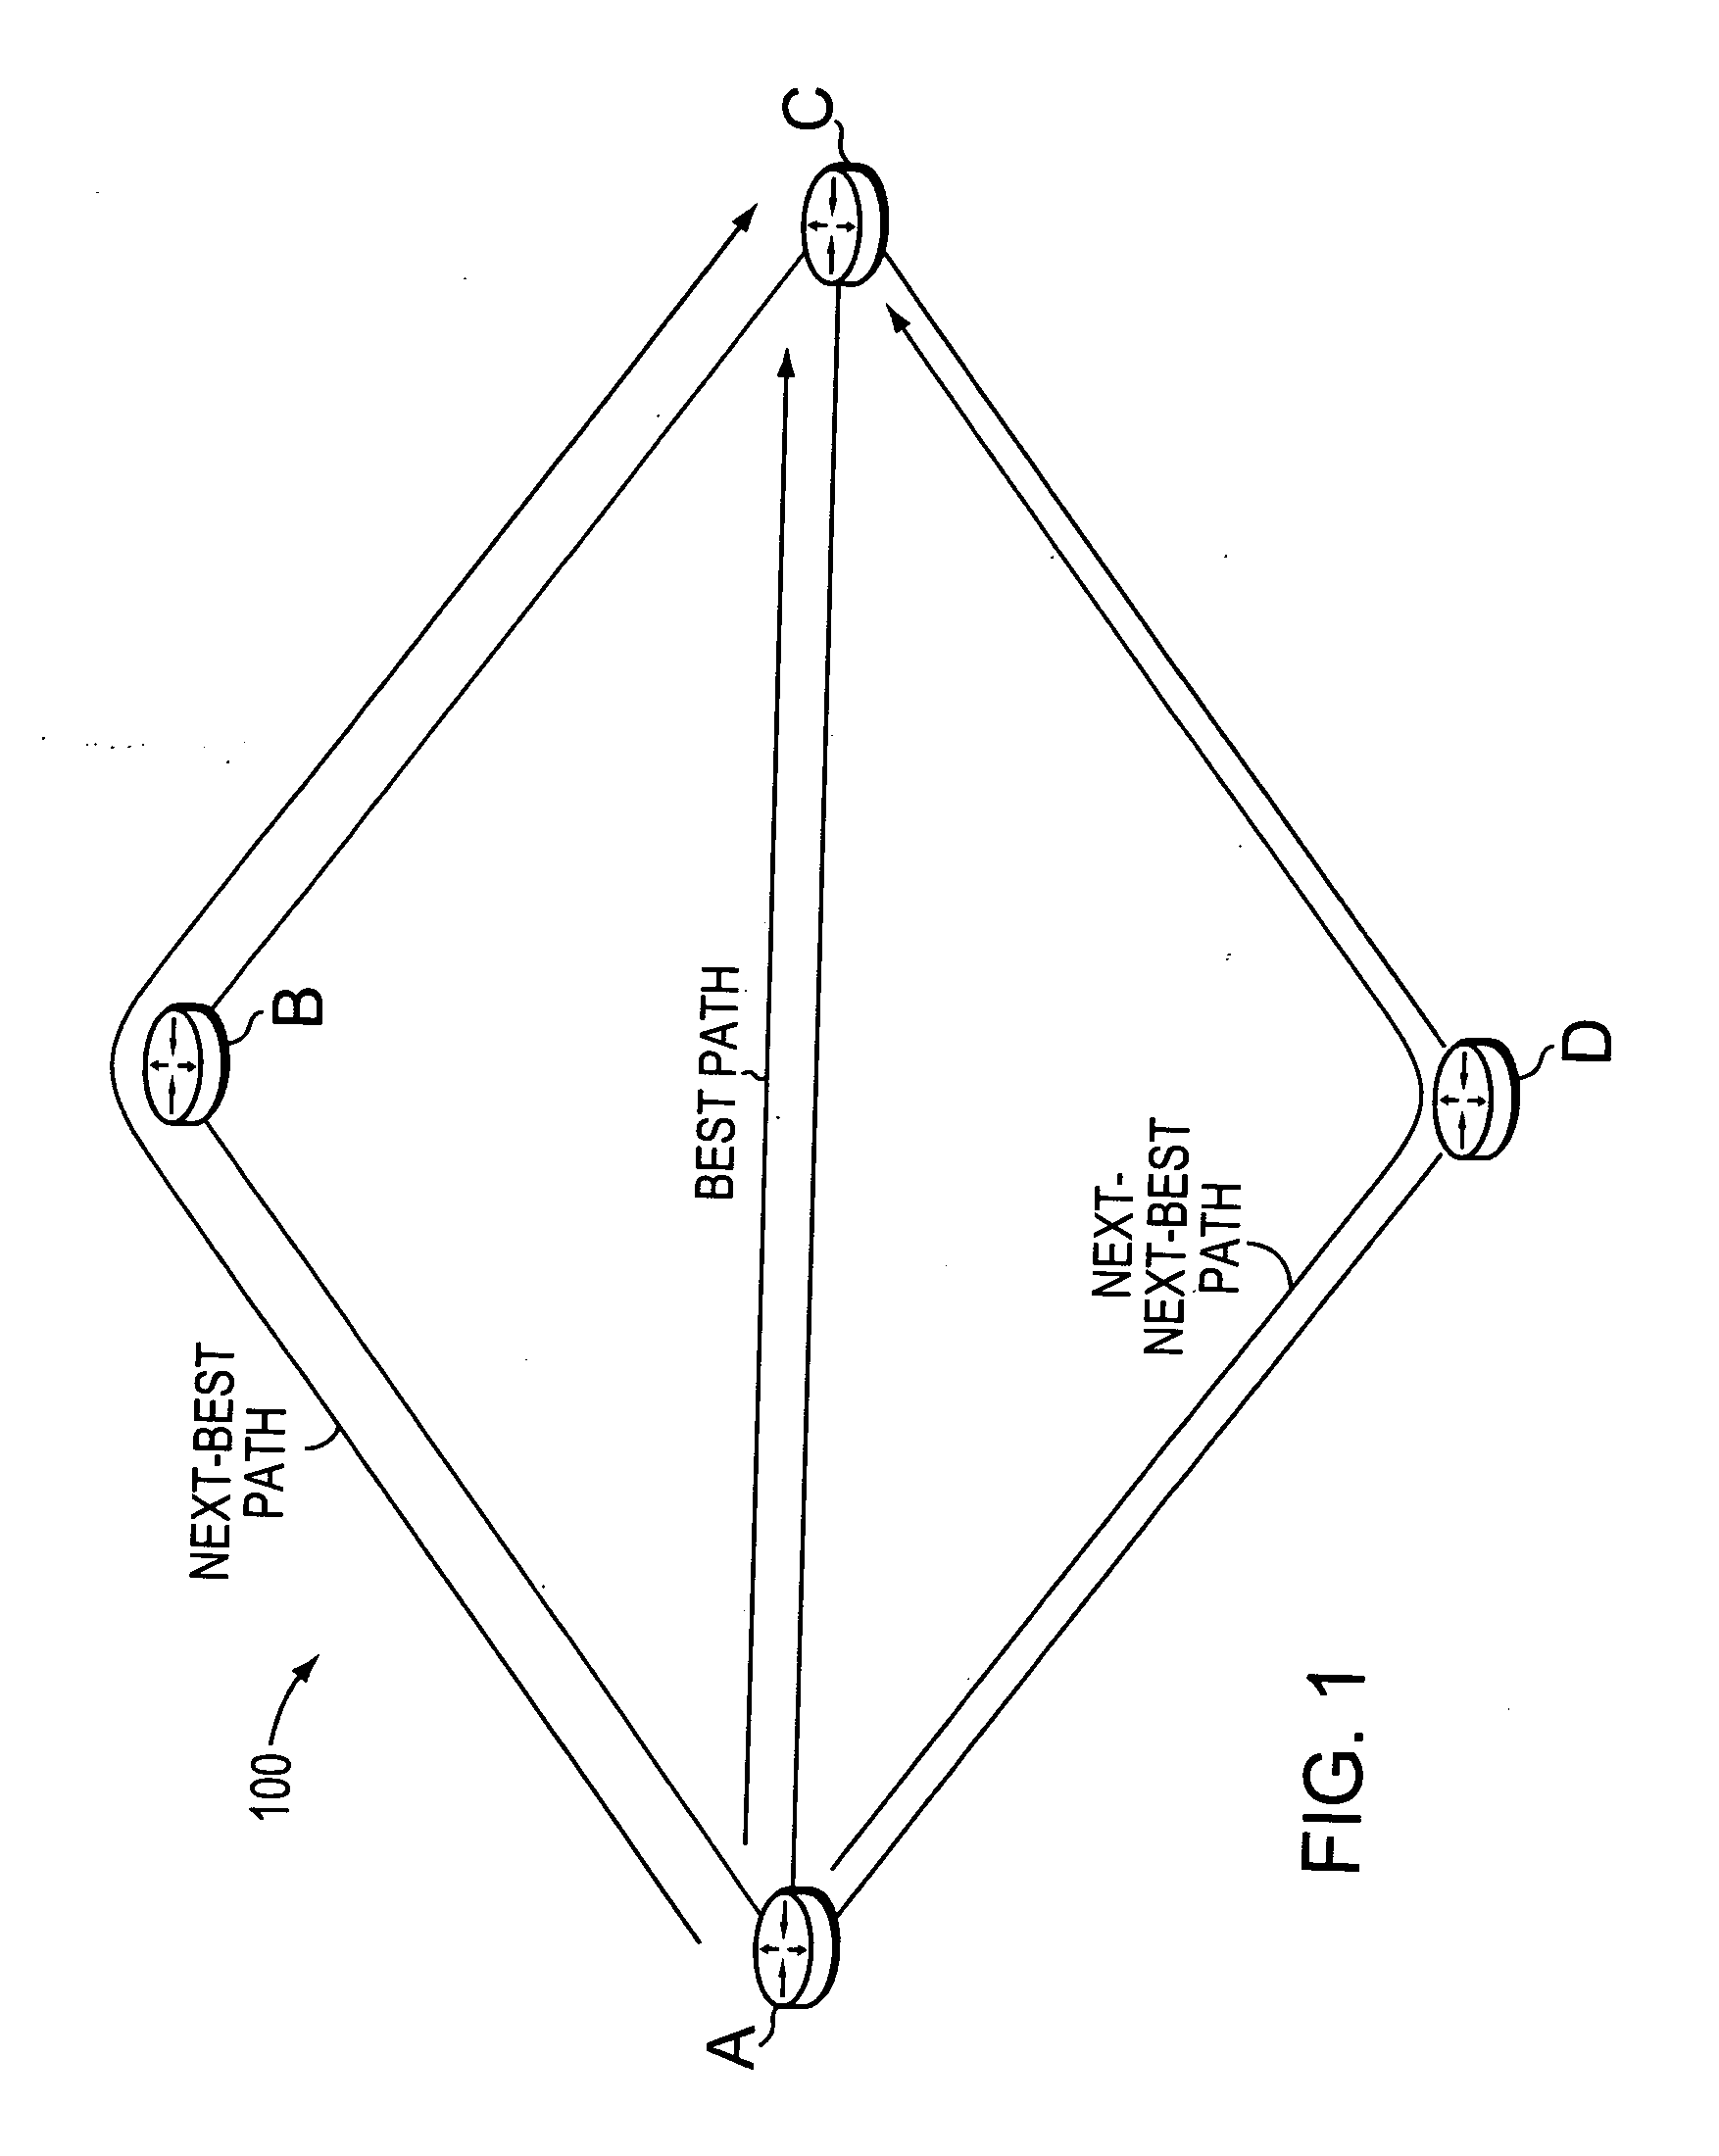 Efficiently decoupling reservation and data forwarding of data flows in a computer network